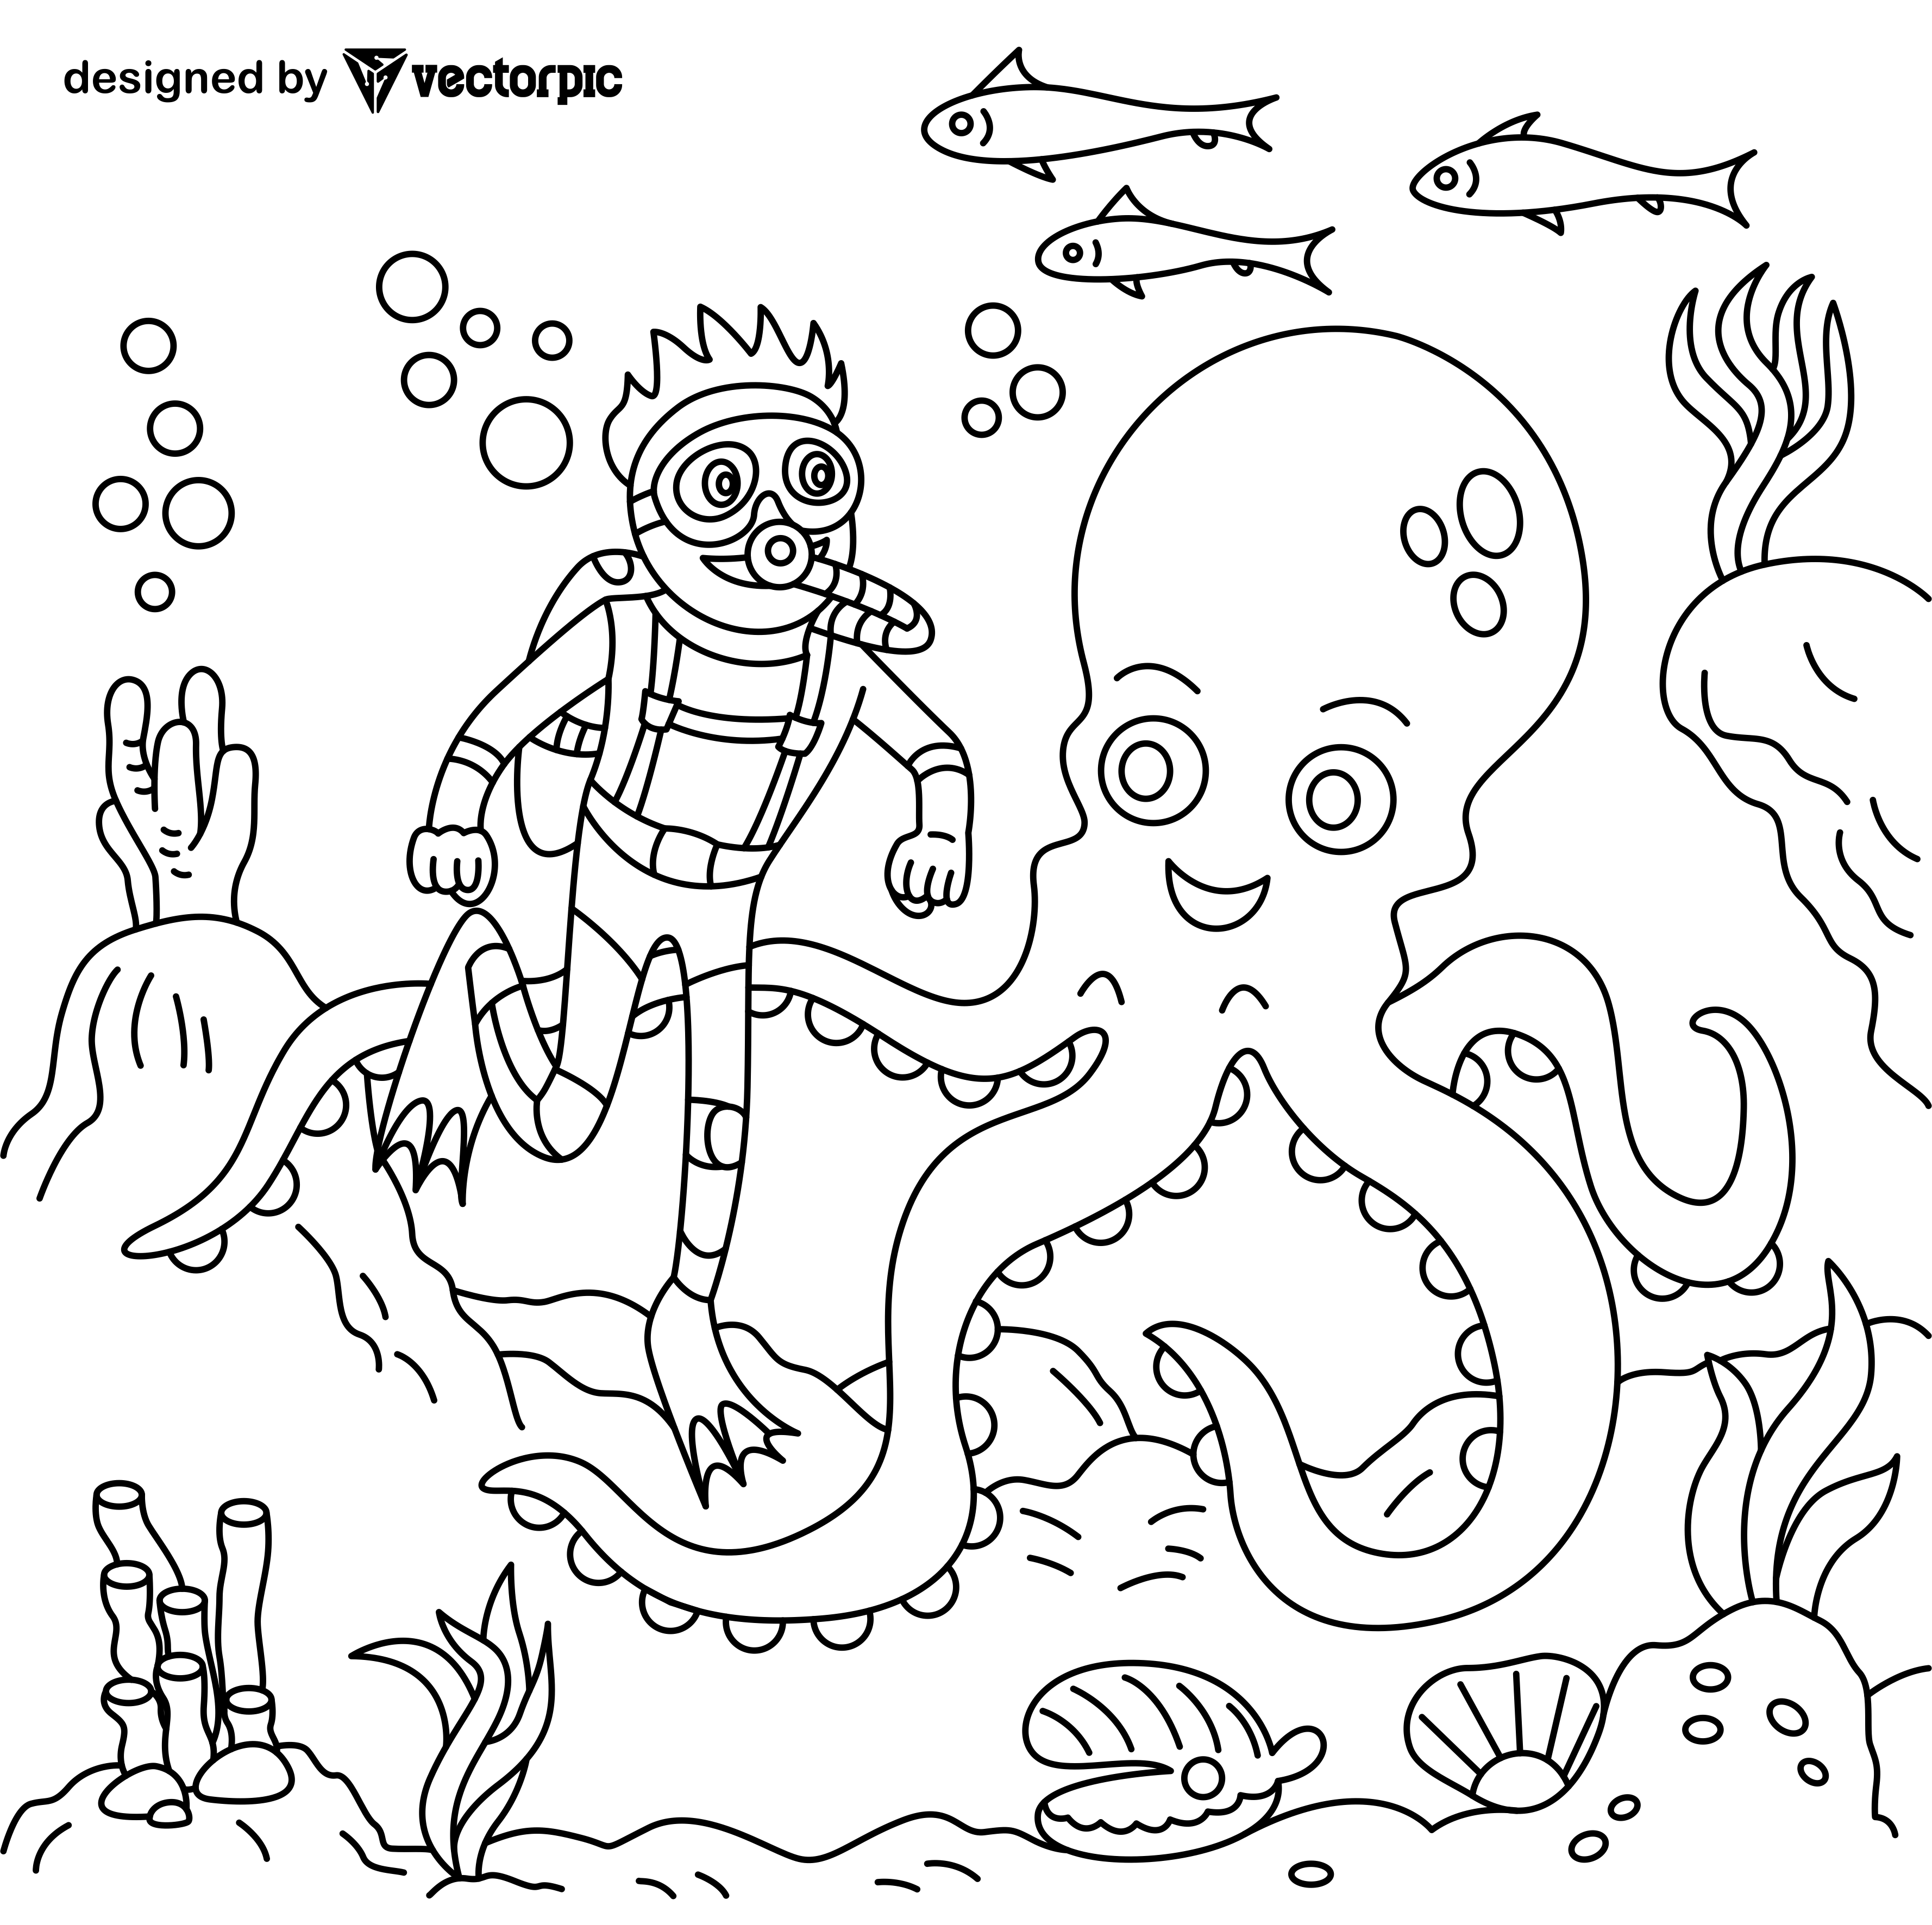 Divers and octopuses coloring pages for kids adults design free vector